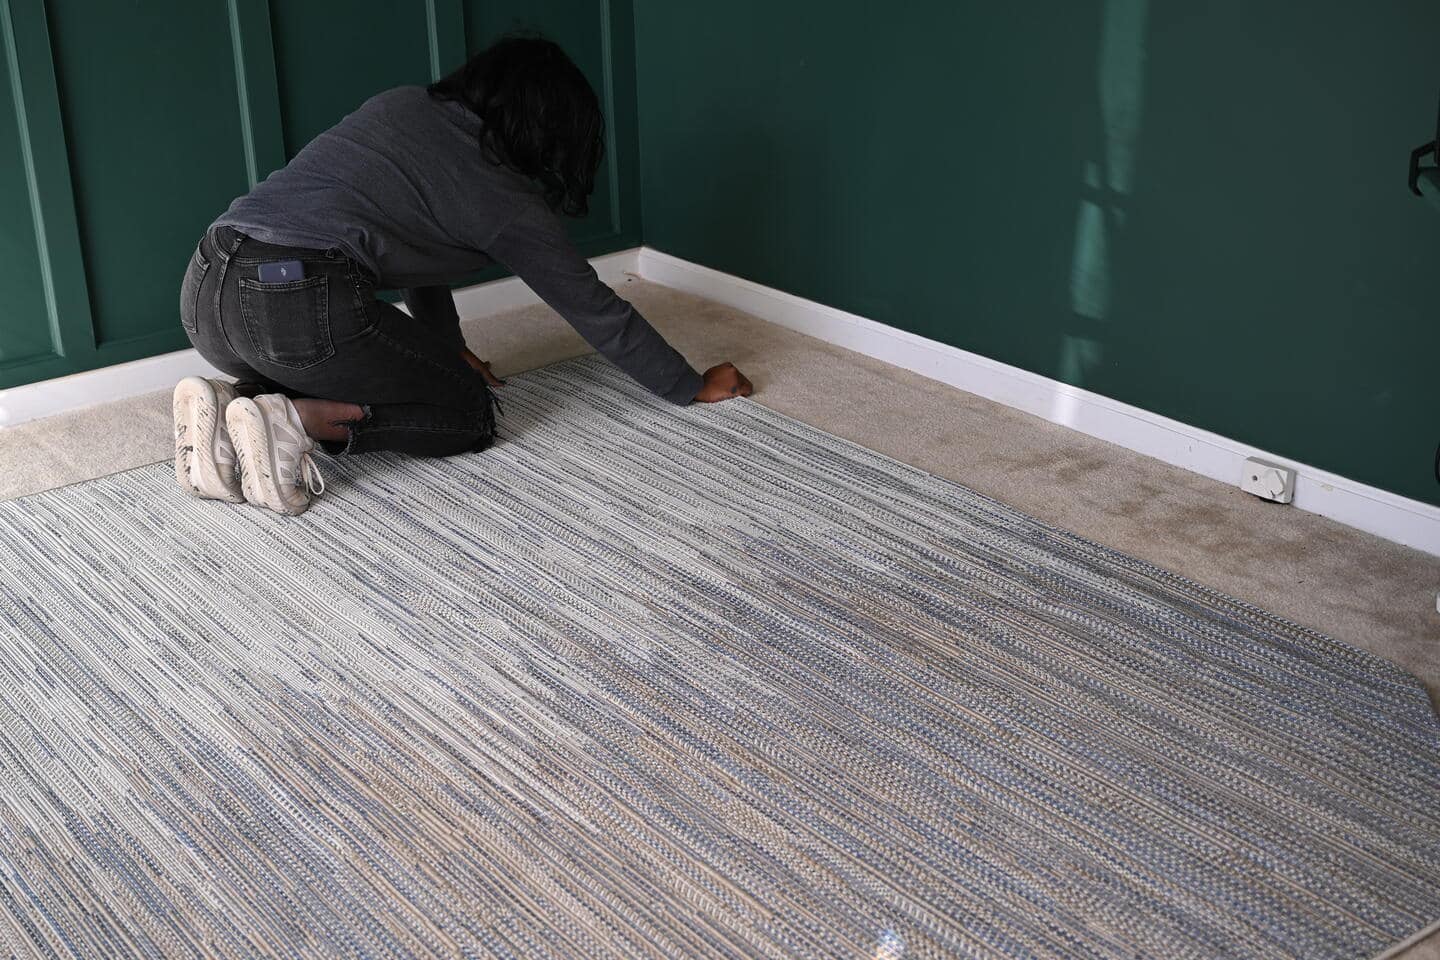 Lauren is laying out the area rug that covers the office floor. The rug is a striped woven mix of neutral colors and a deep blue. 